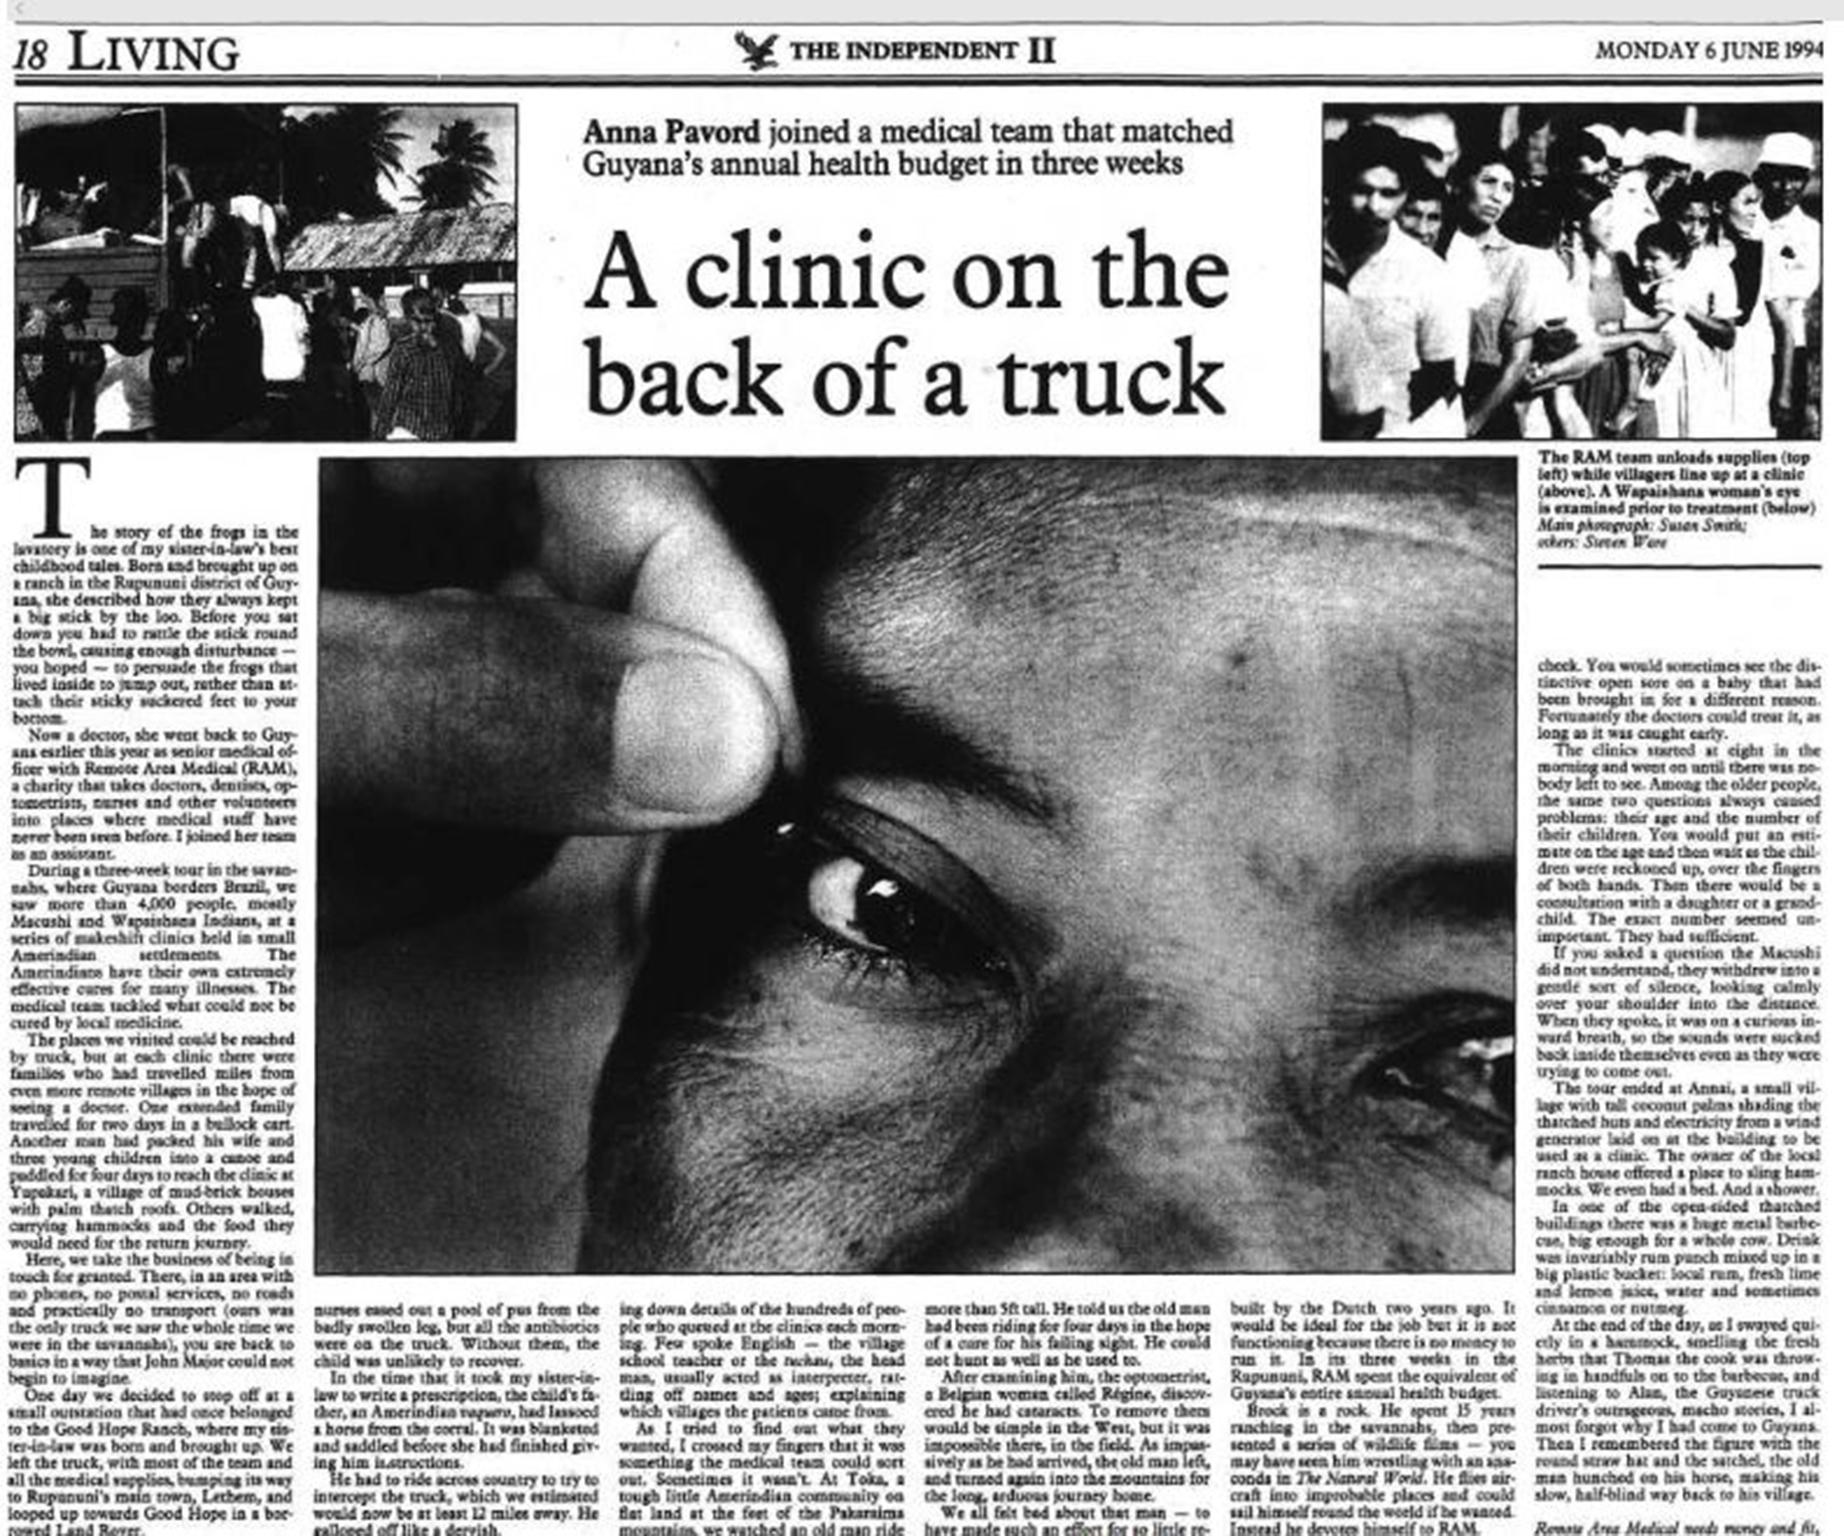 The Independent reports on a RAM clinic in Guyana on Monday 6 June 1994 (The Independent)